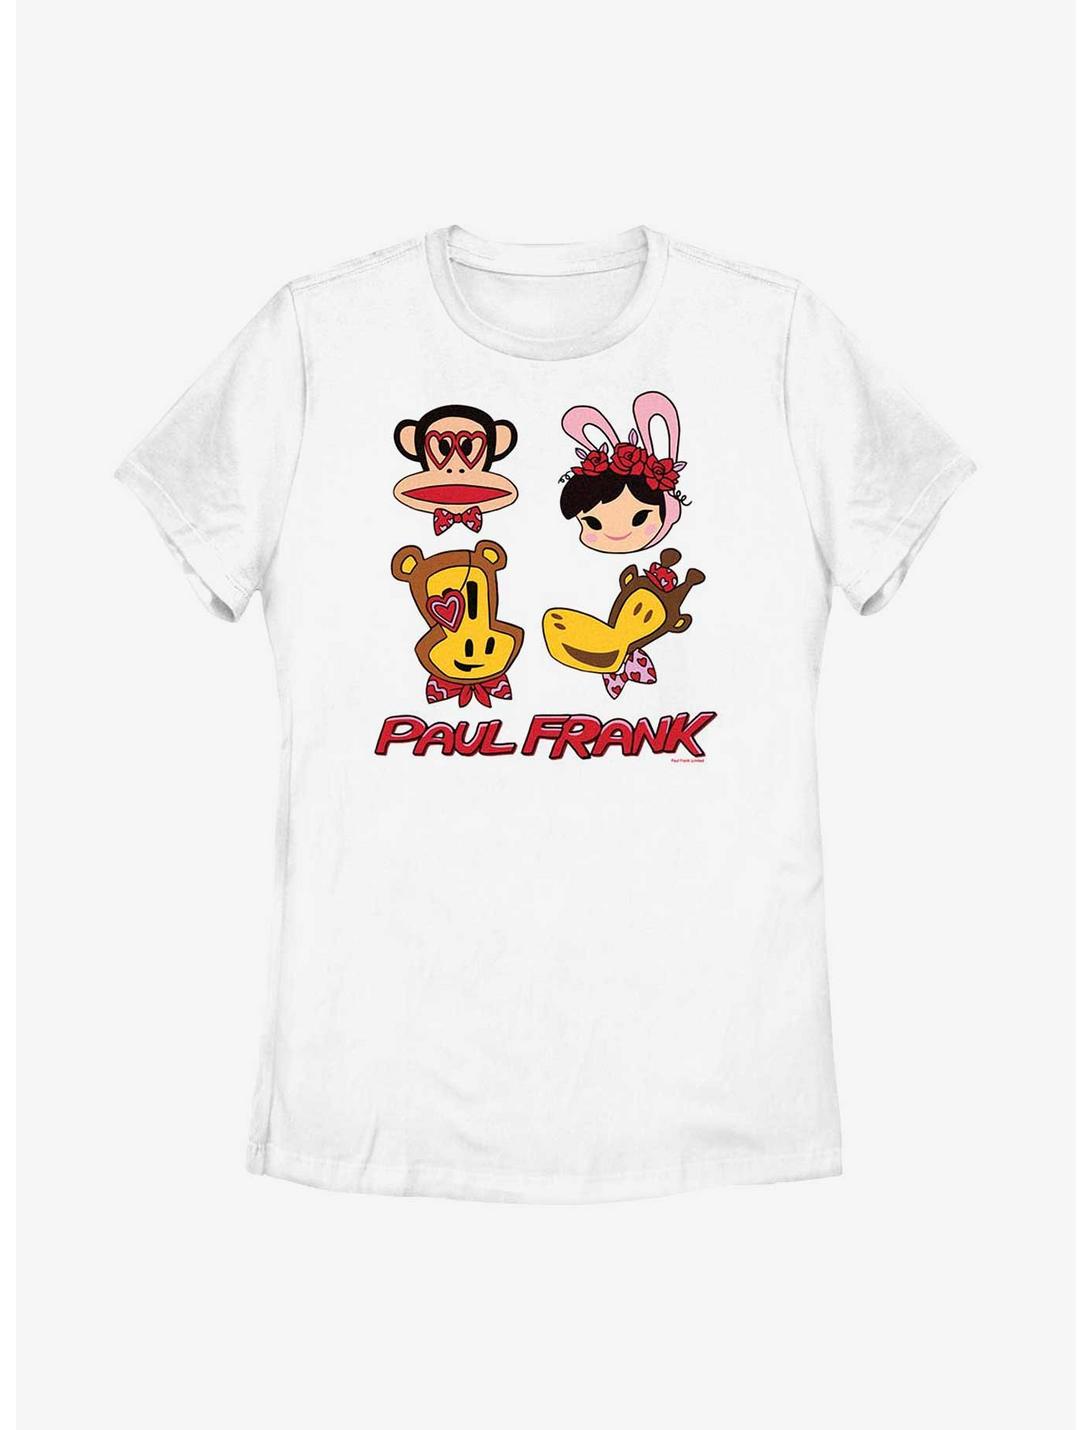 Paul Frank Valentine's Characters Womens T-Shirt, WHITE, hi-res